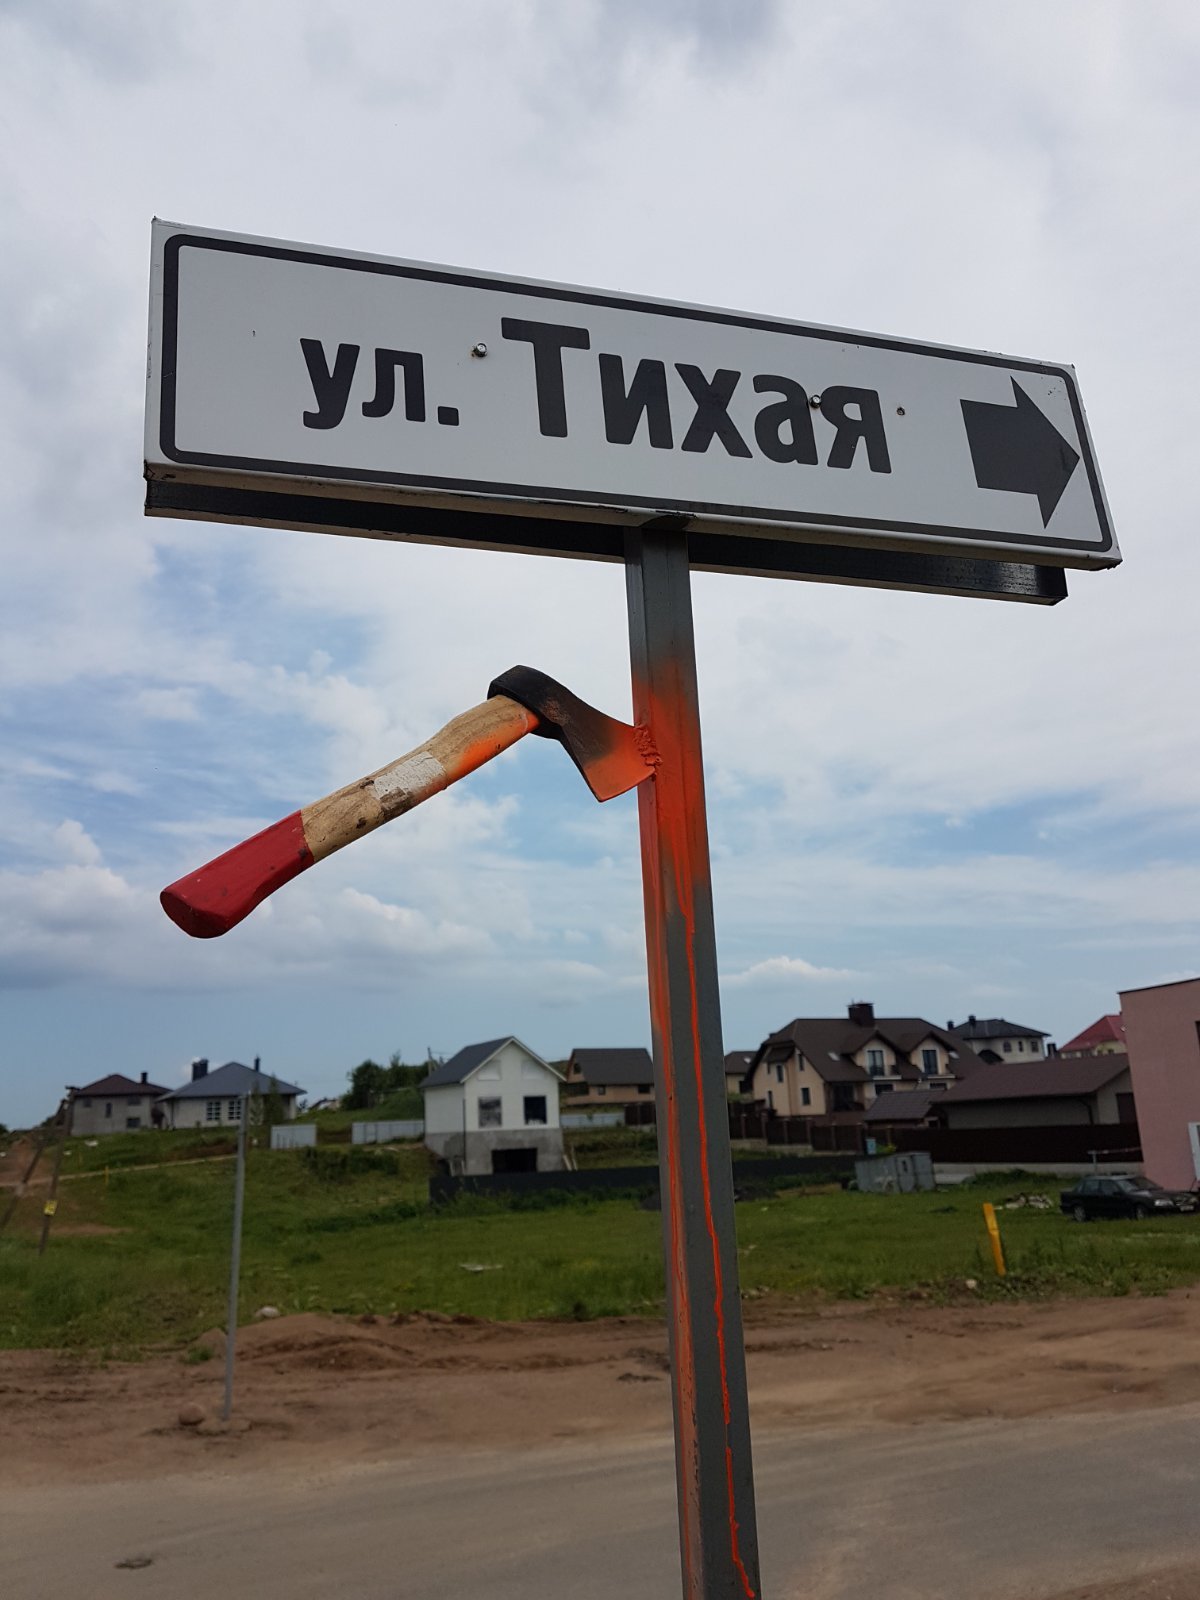 Post #7521583 - My, Axe, The street, Republic of Belarus, Everything is quiet